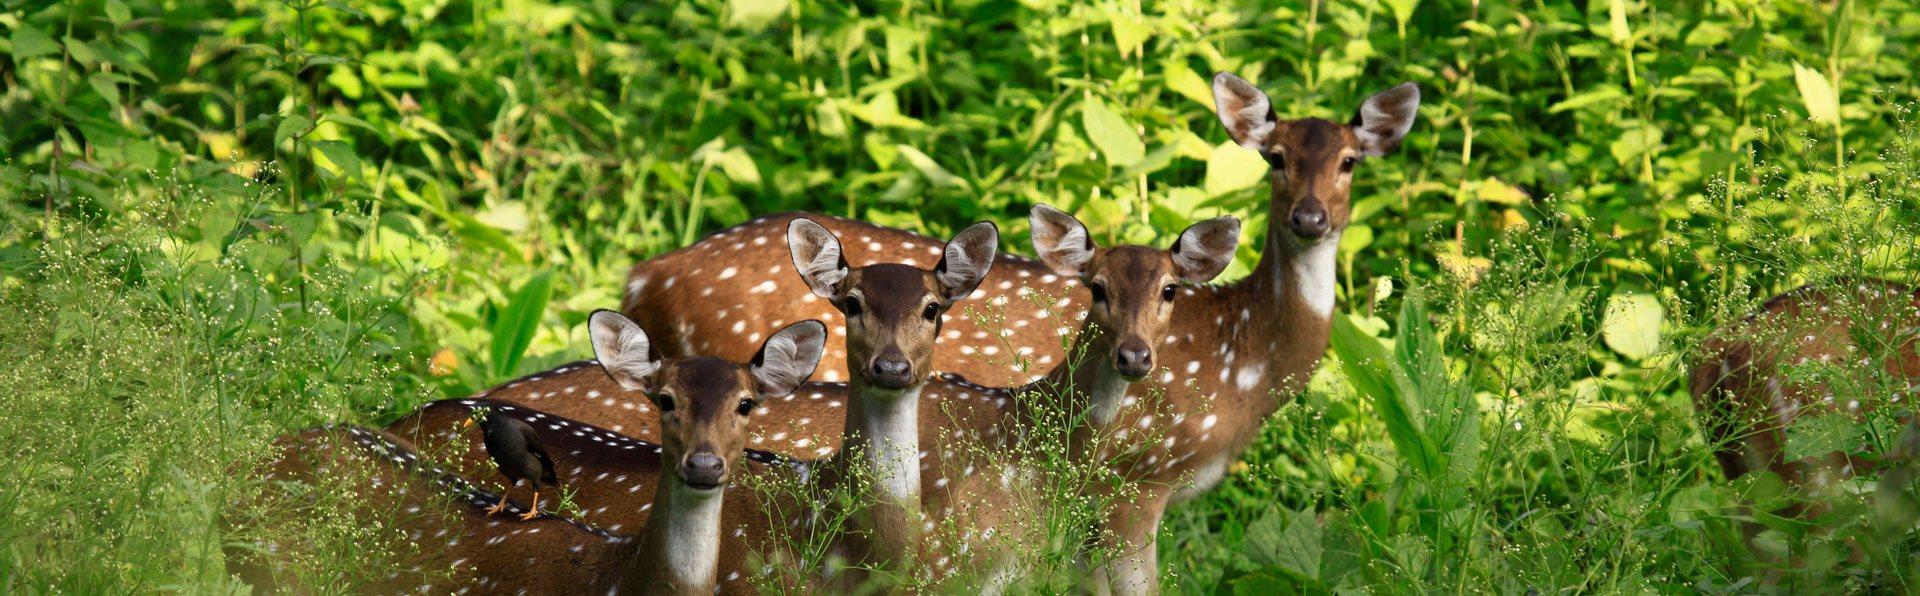 Wayanad Muthanga Forest Deers